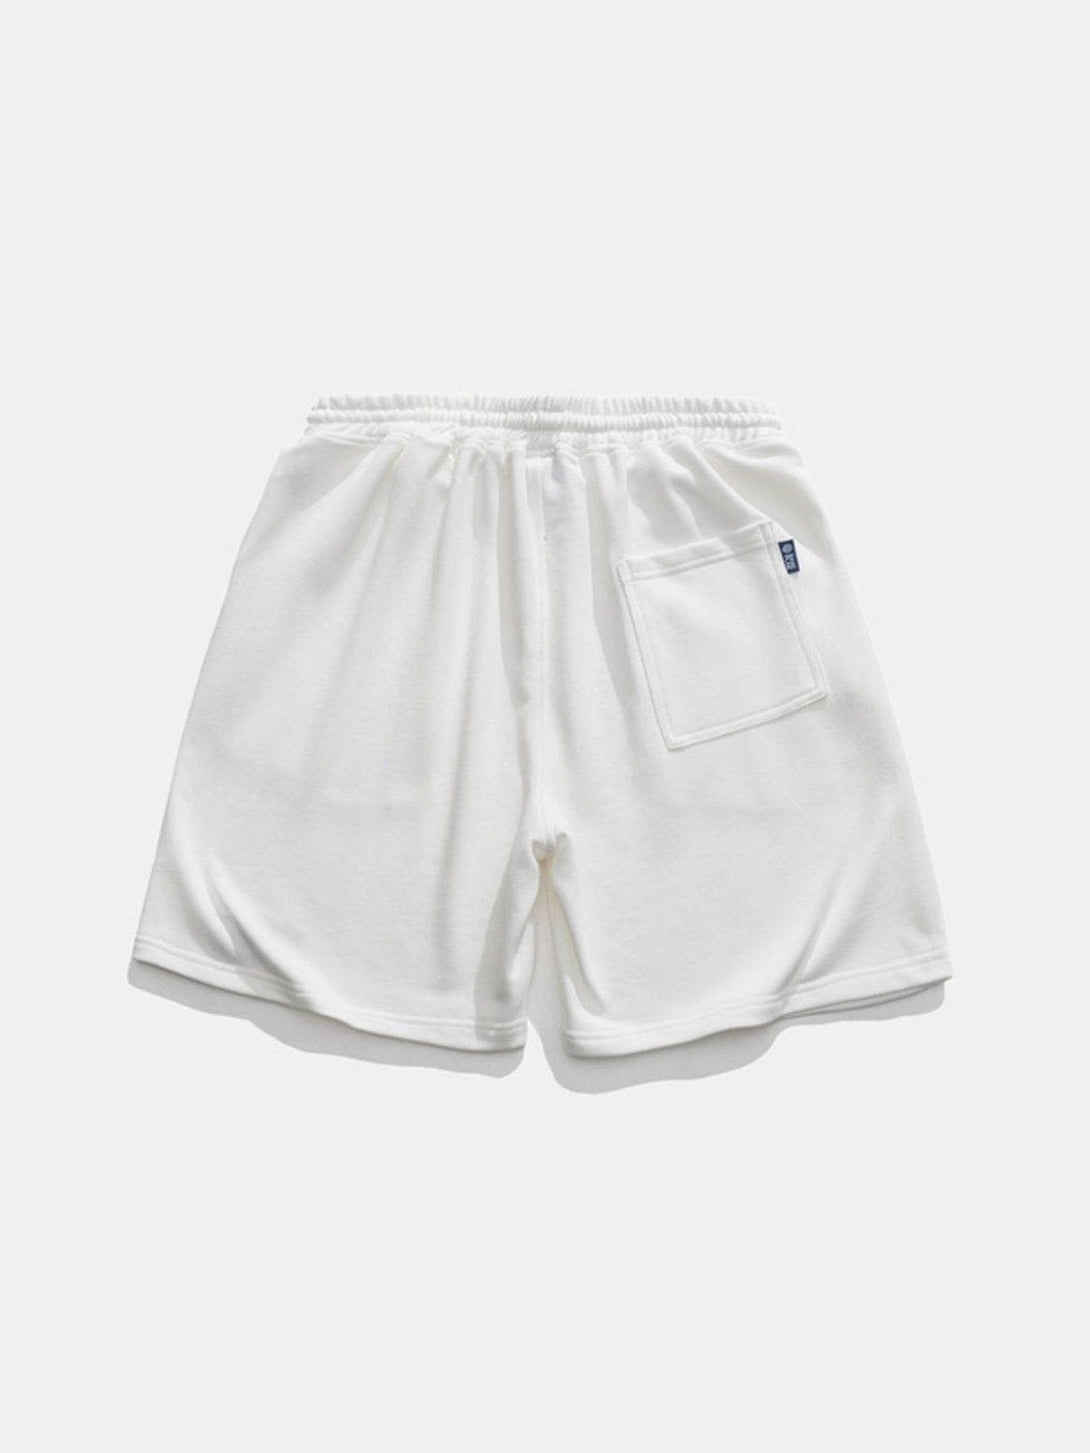 Levefly - Embroidery Solid Color Shorts - Streetwear Fashion - levefly.com